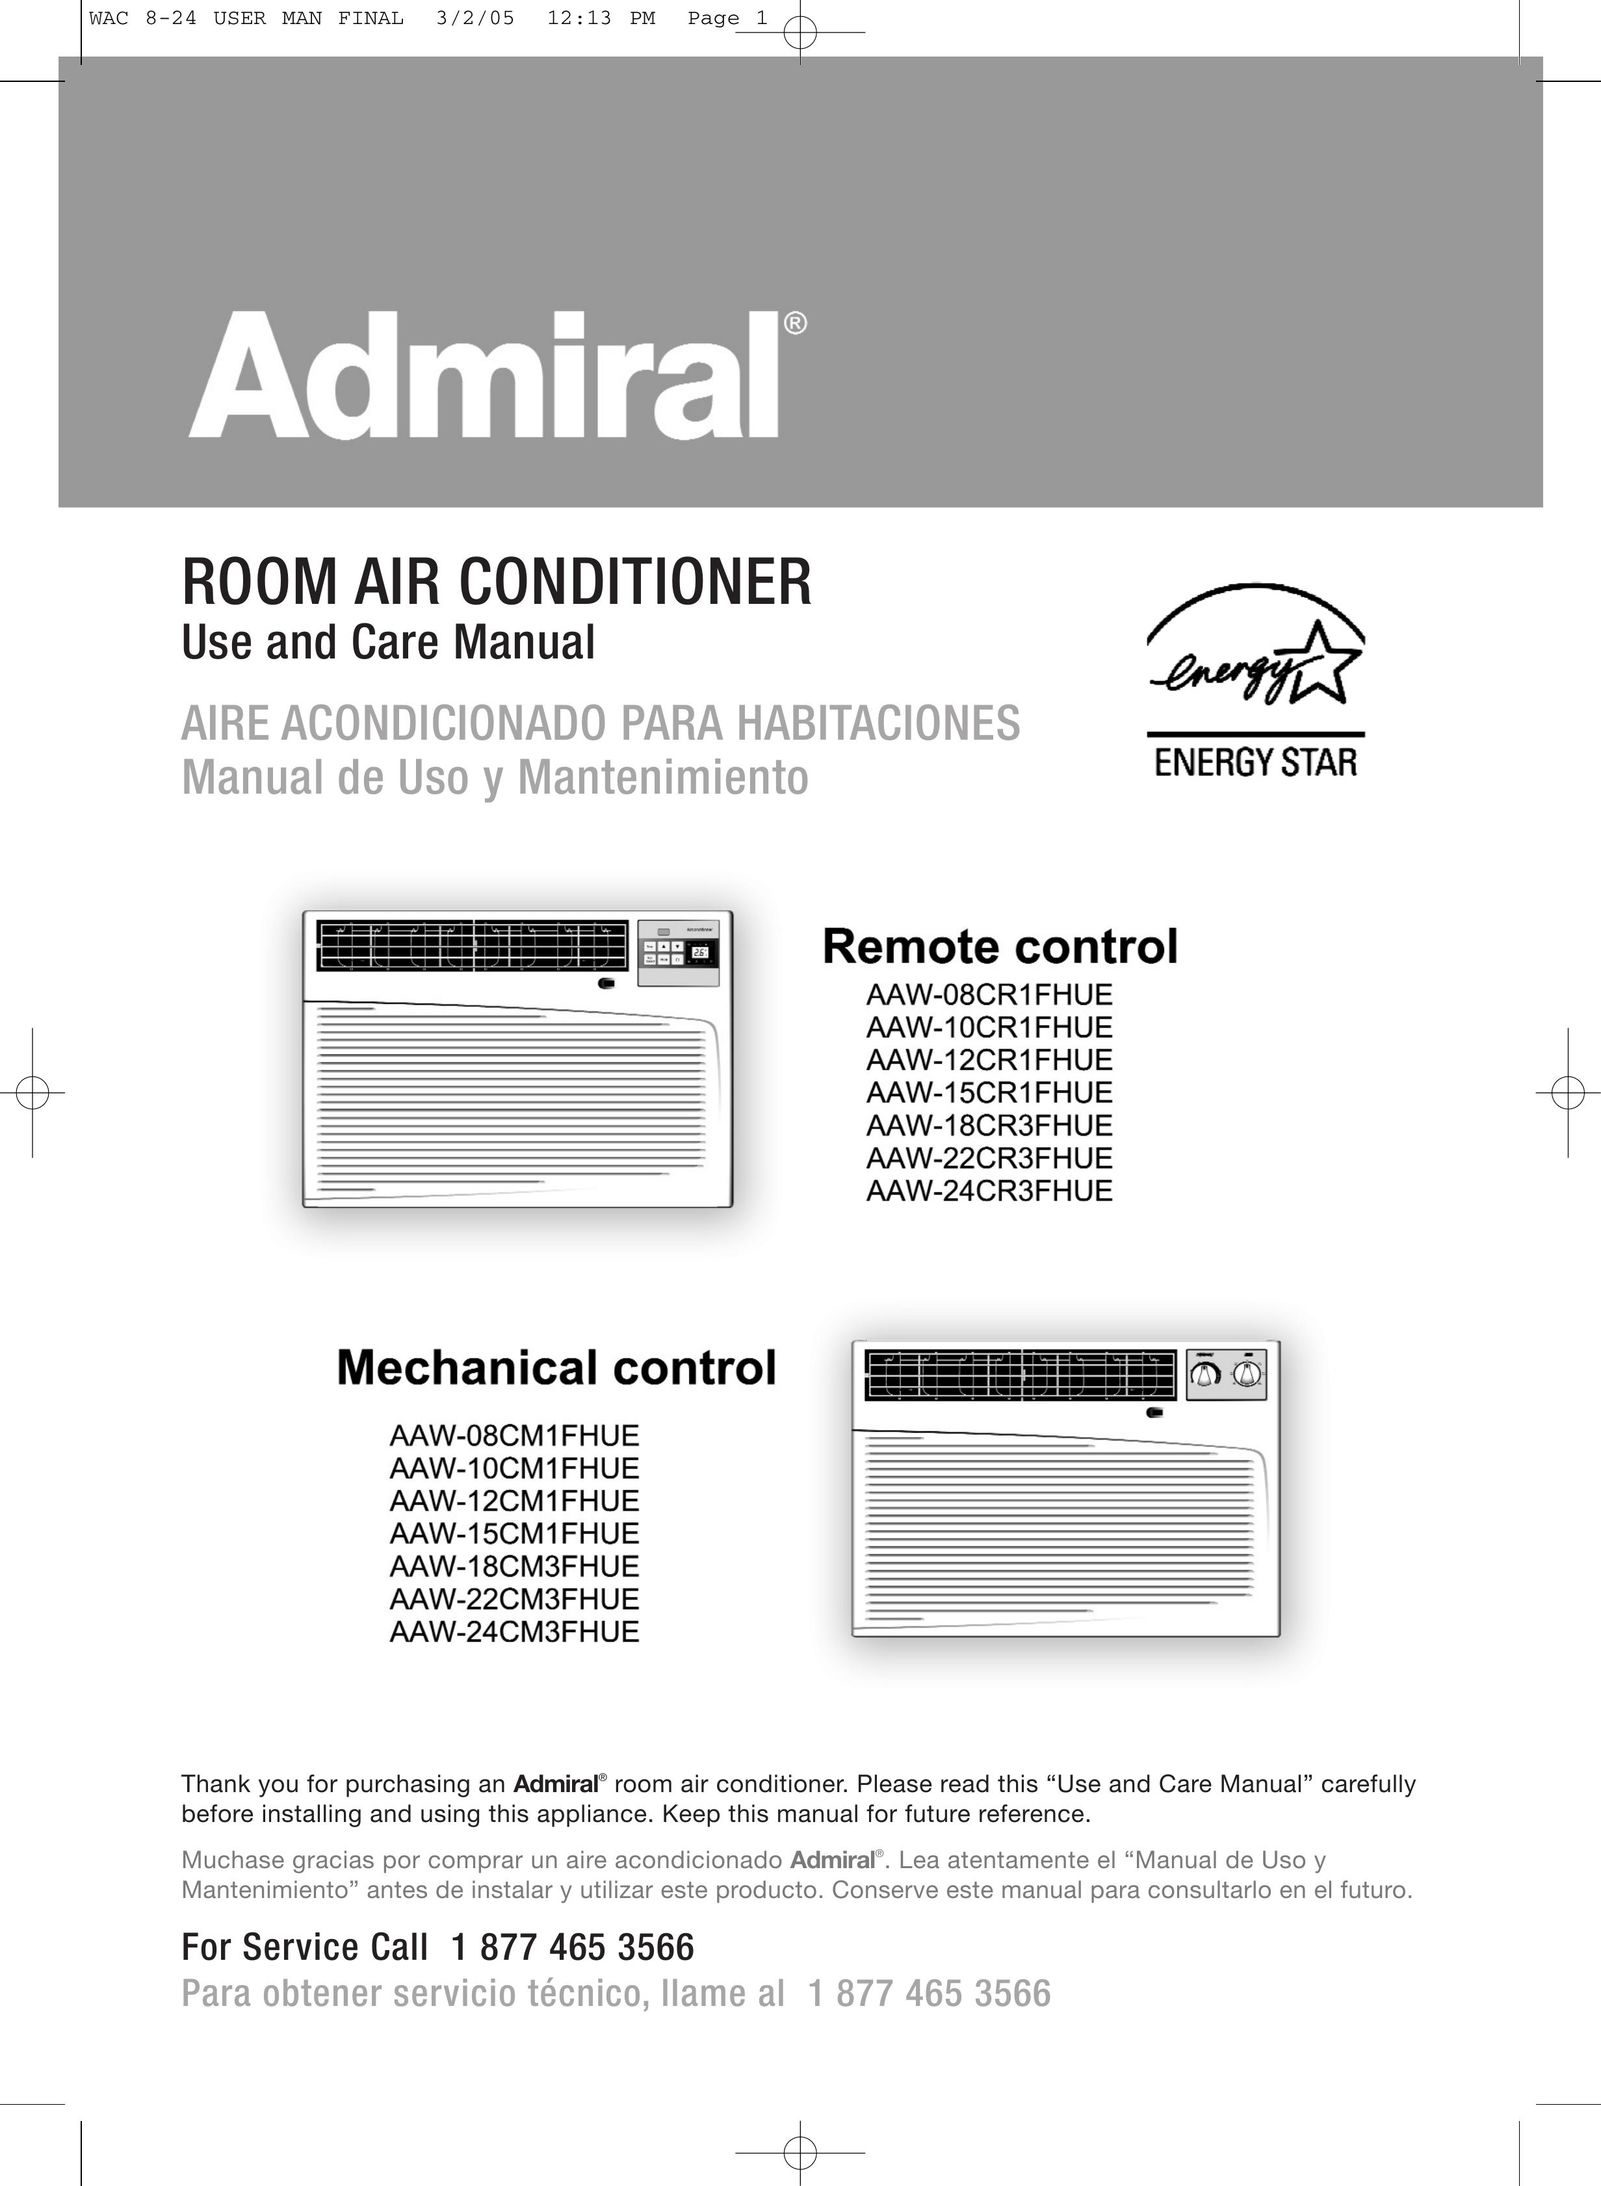 Admiral AAW-15CR1FHUE Air Conditioner User Manual